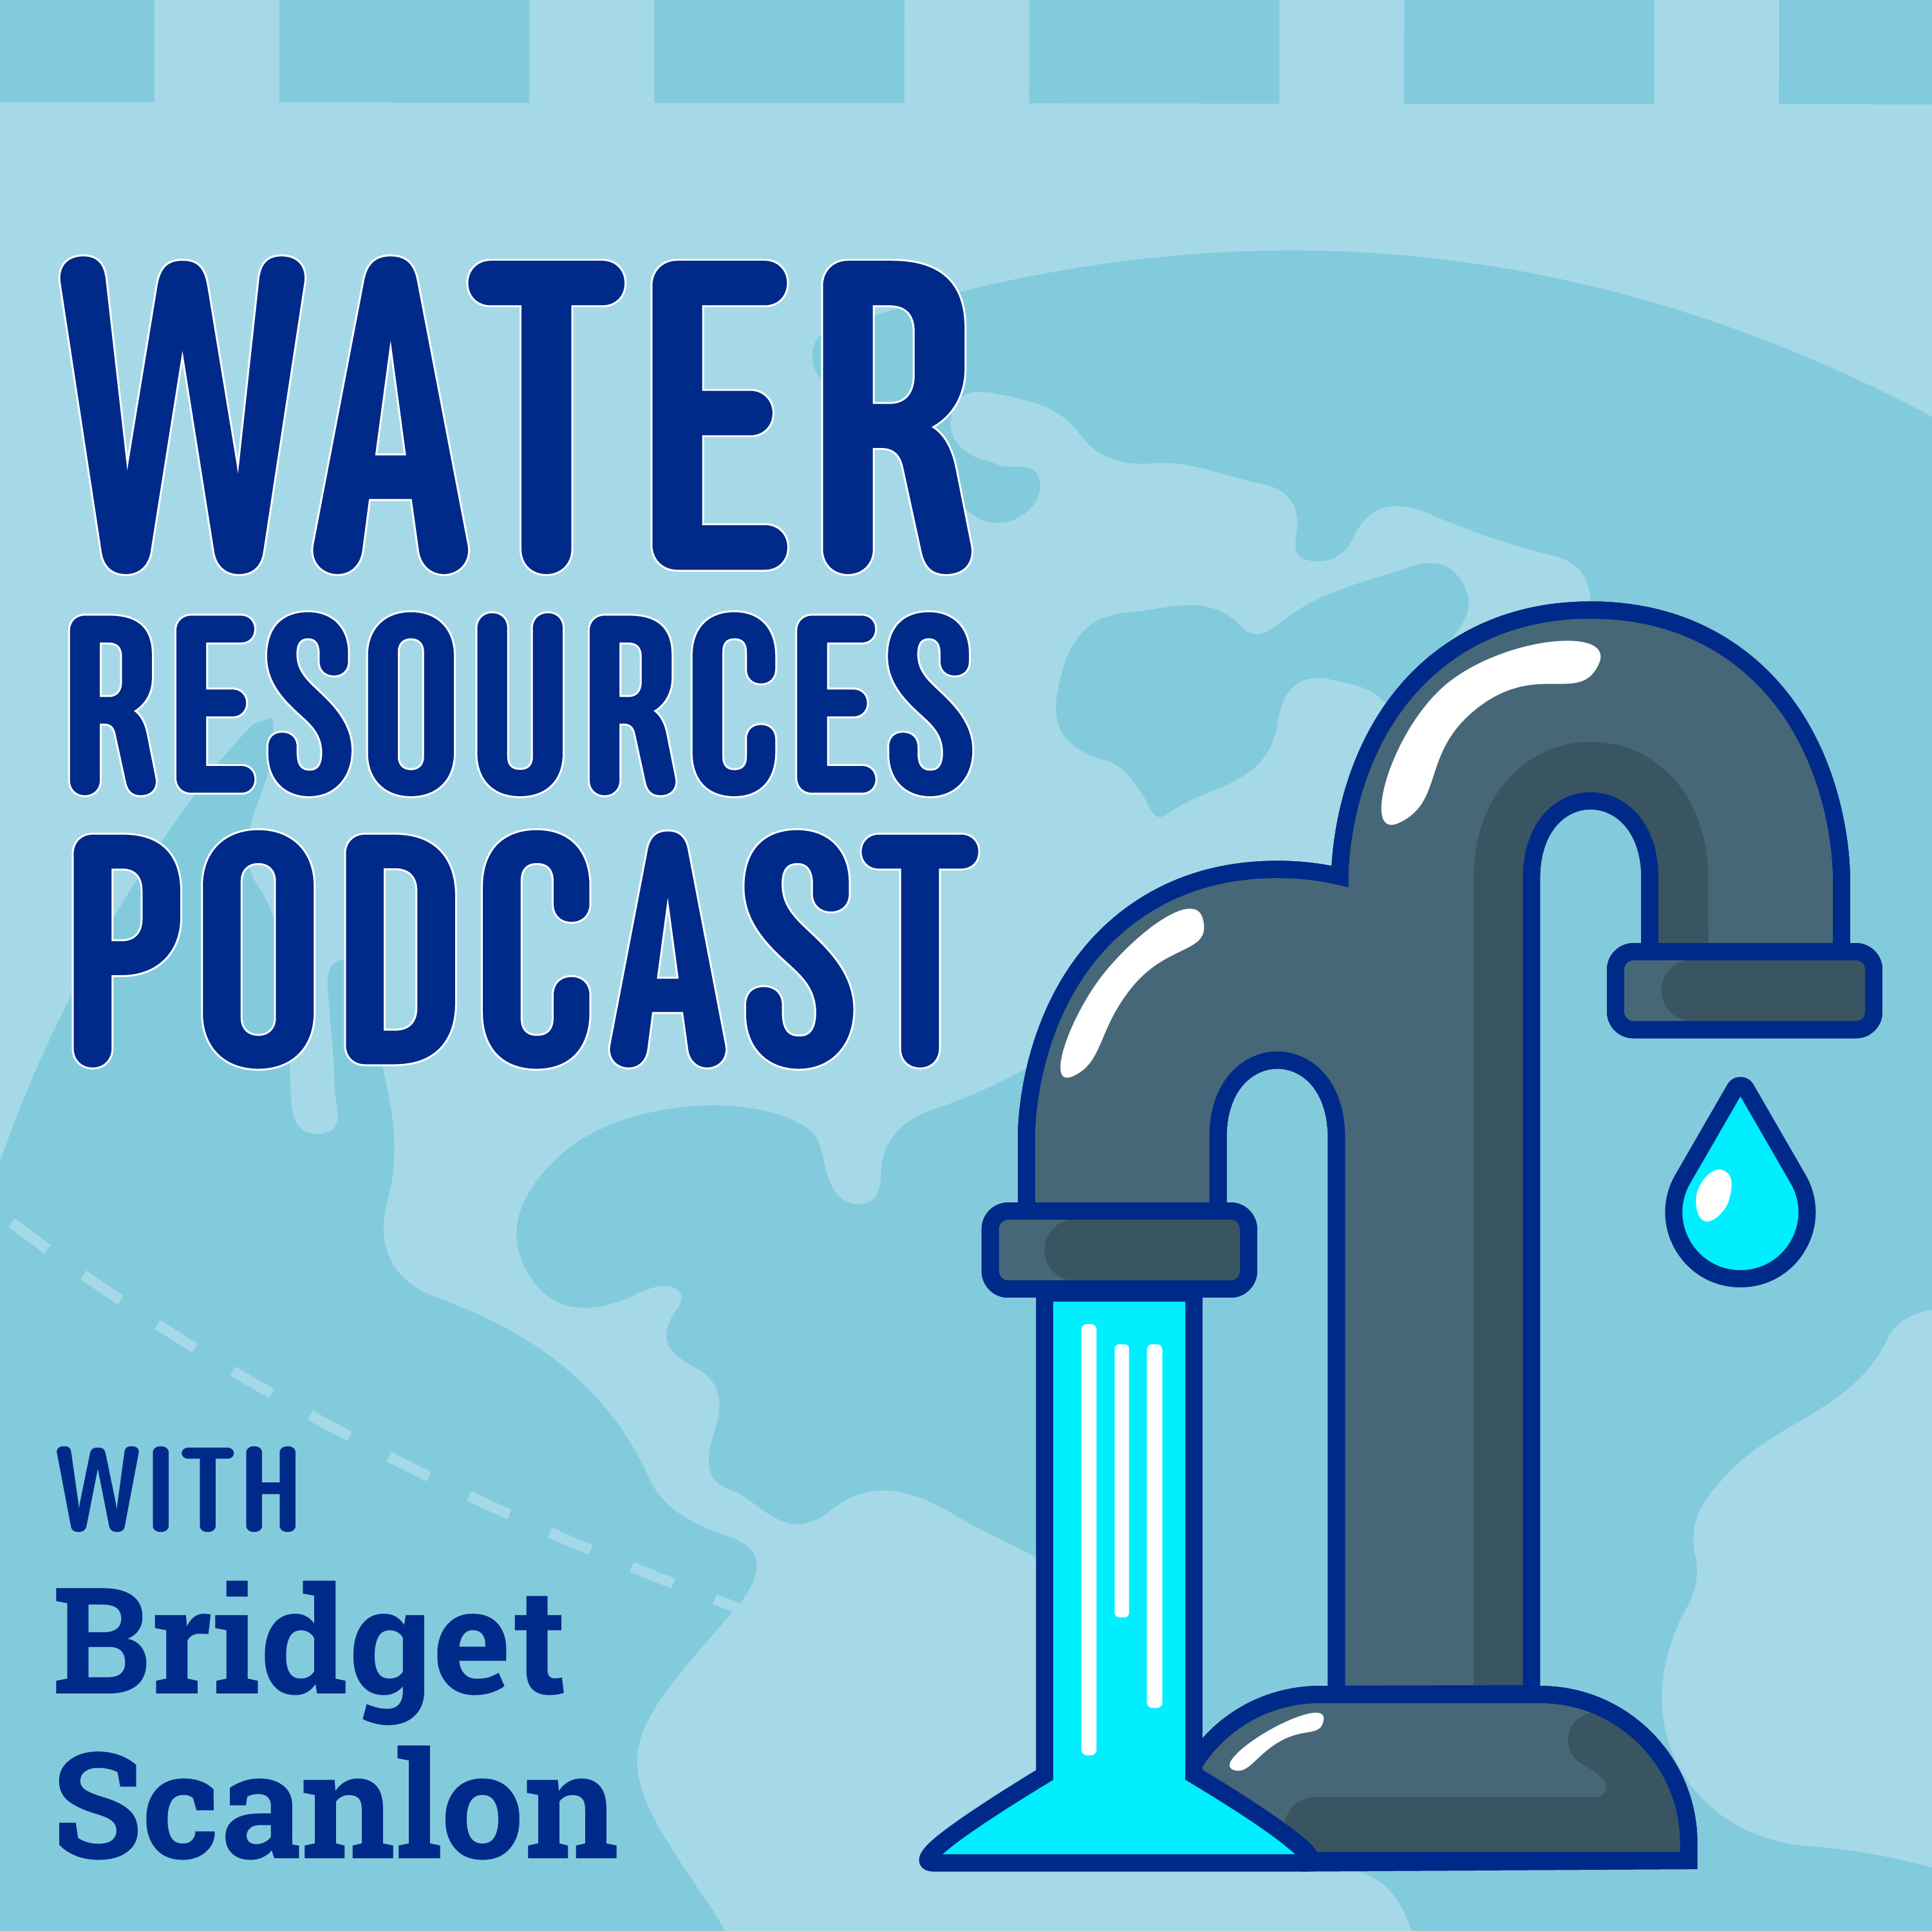 Water Resources Podcast logo